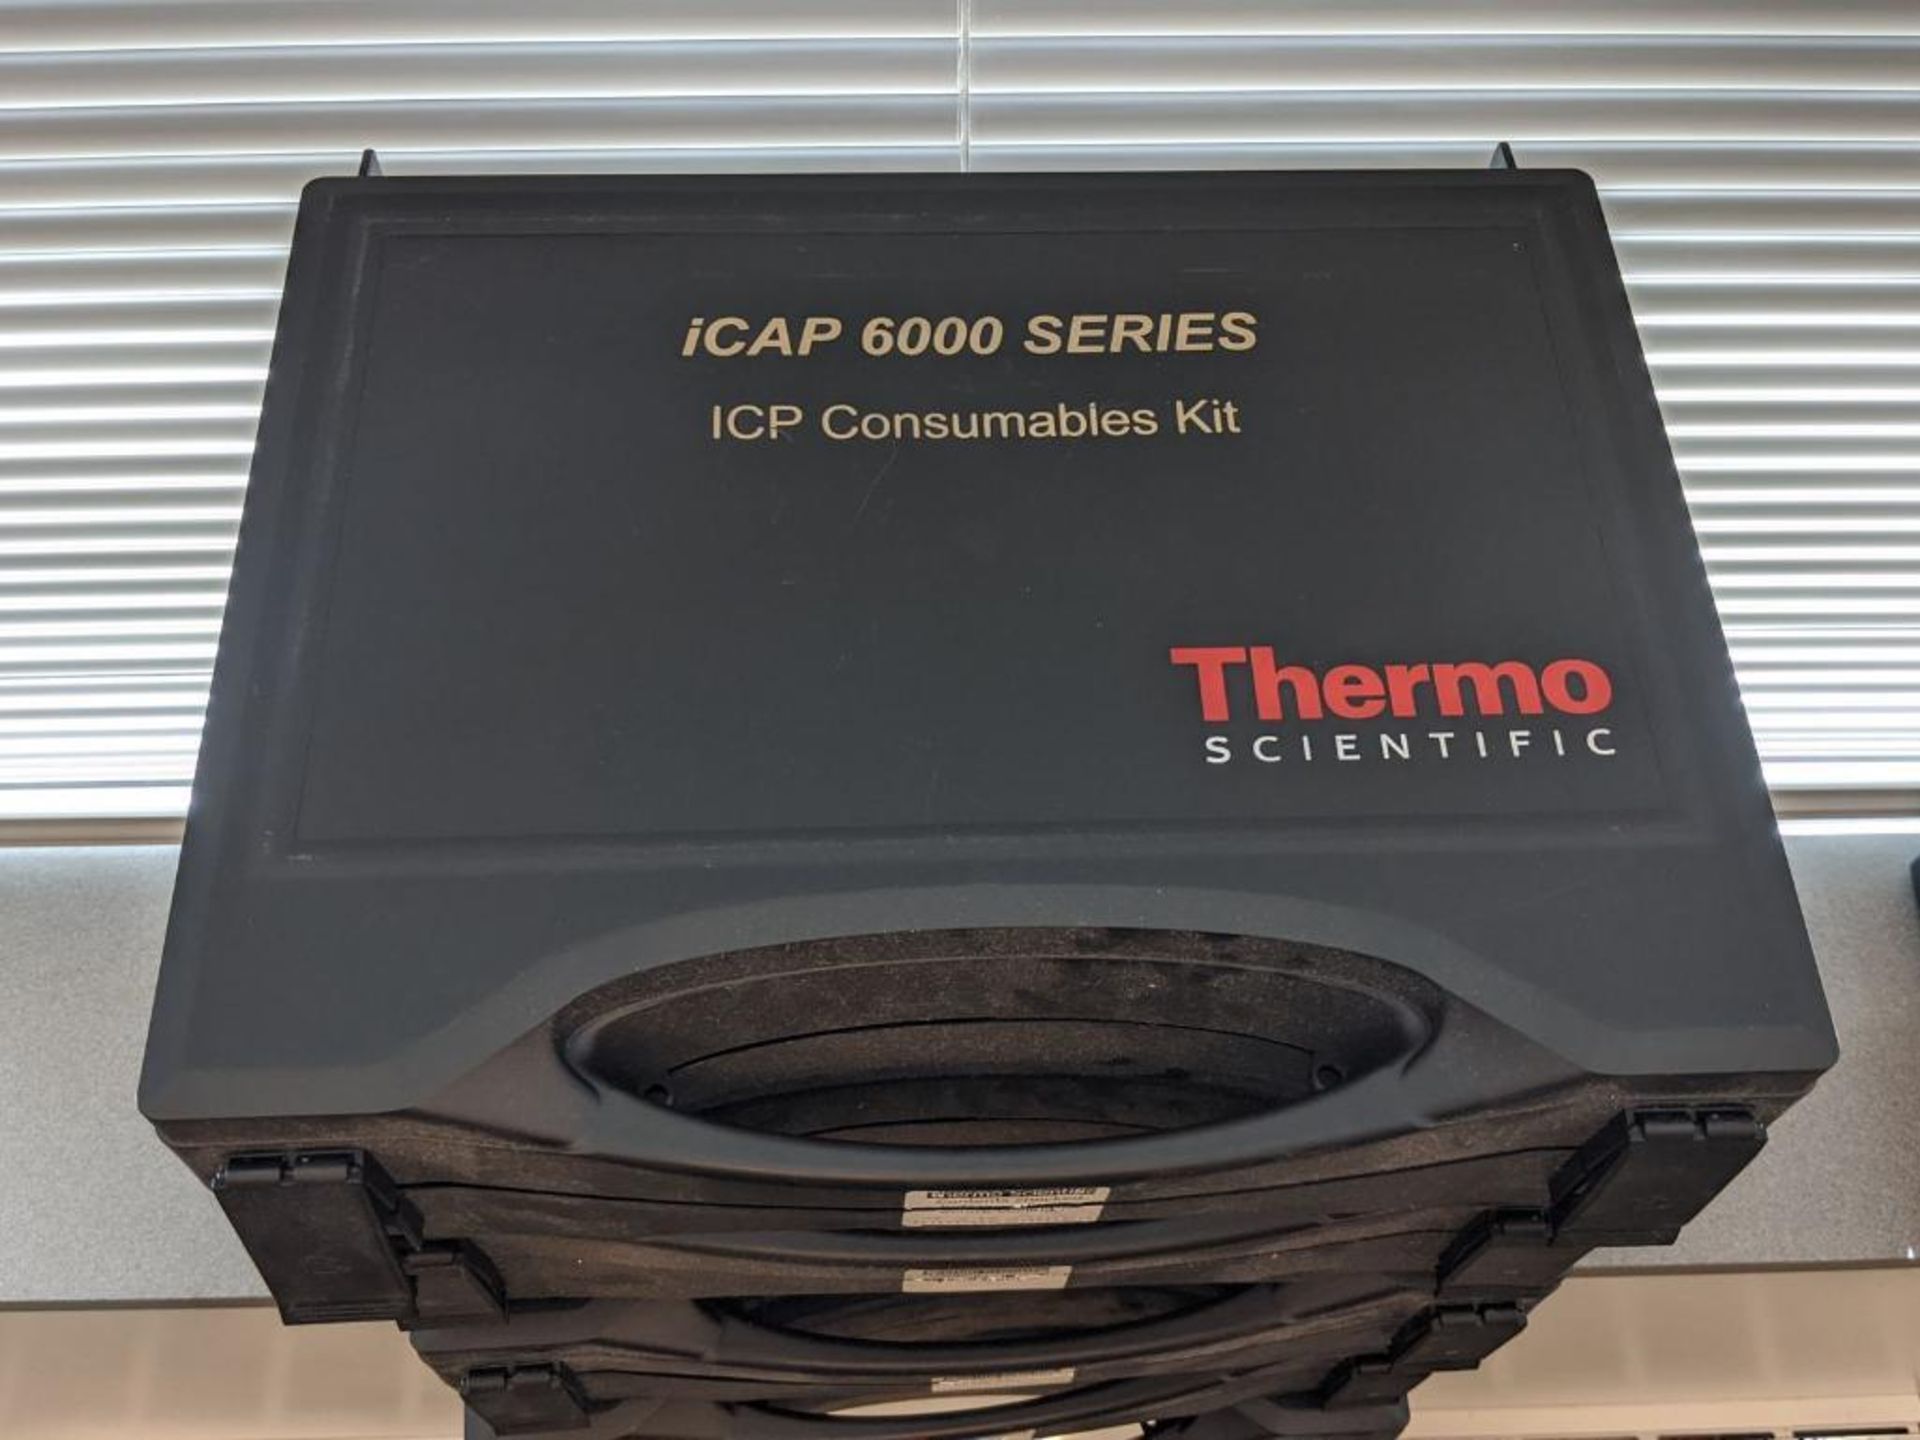 Thermo Scientific iCAP 6000 Series ICP Consumable Kits - Image 7 of 36